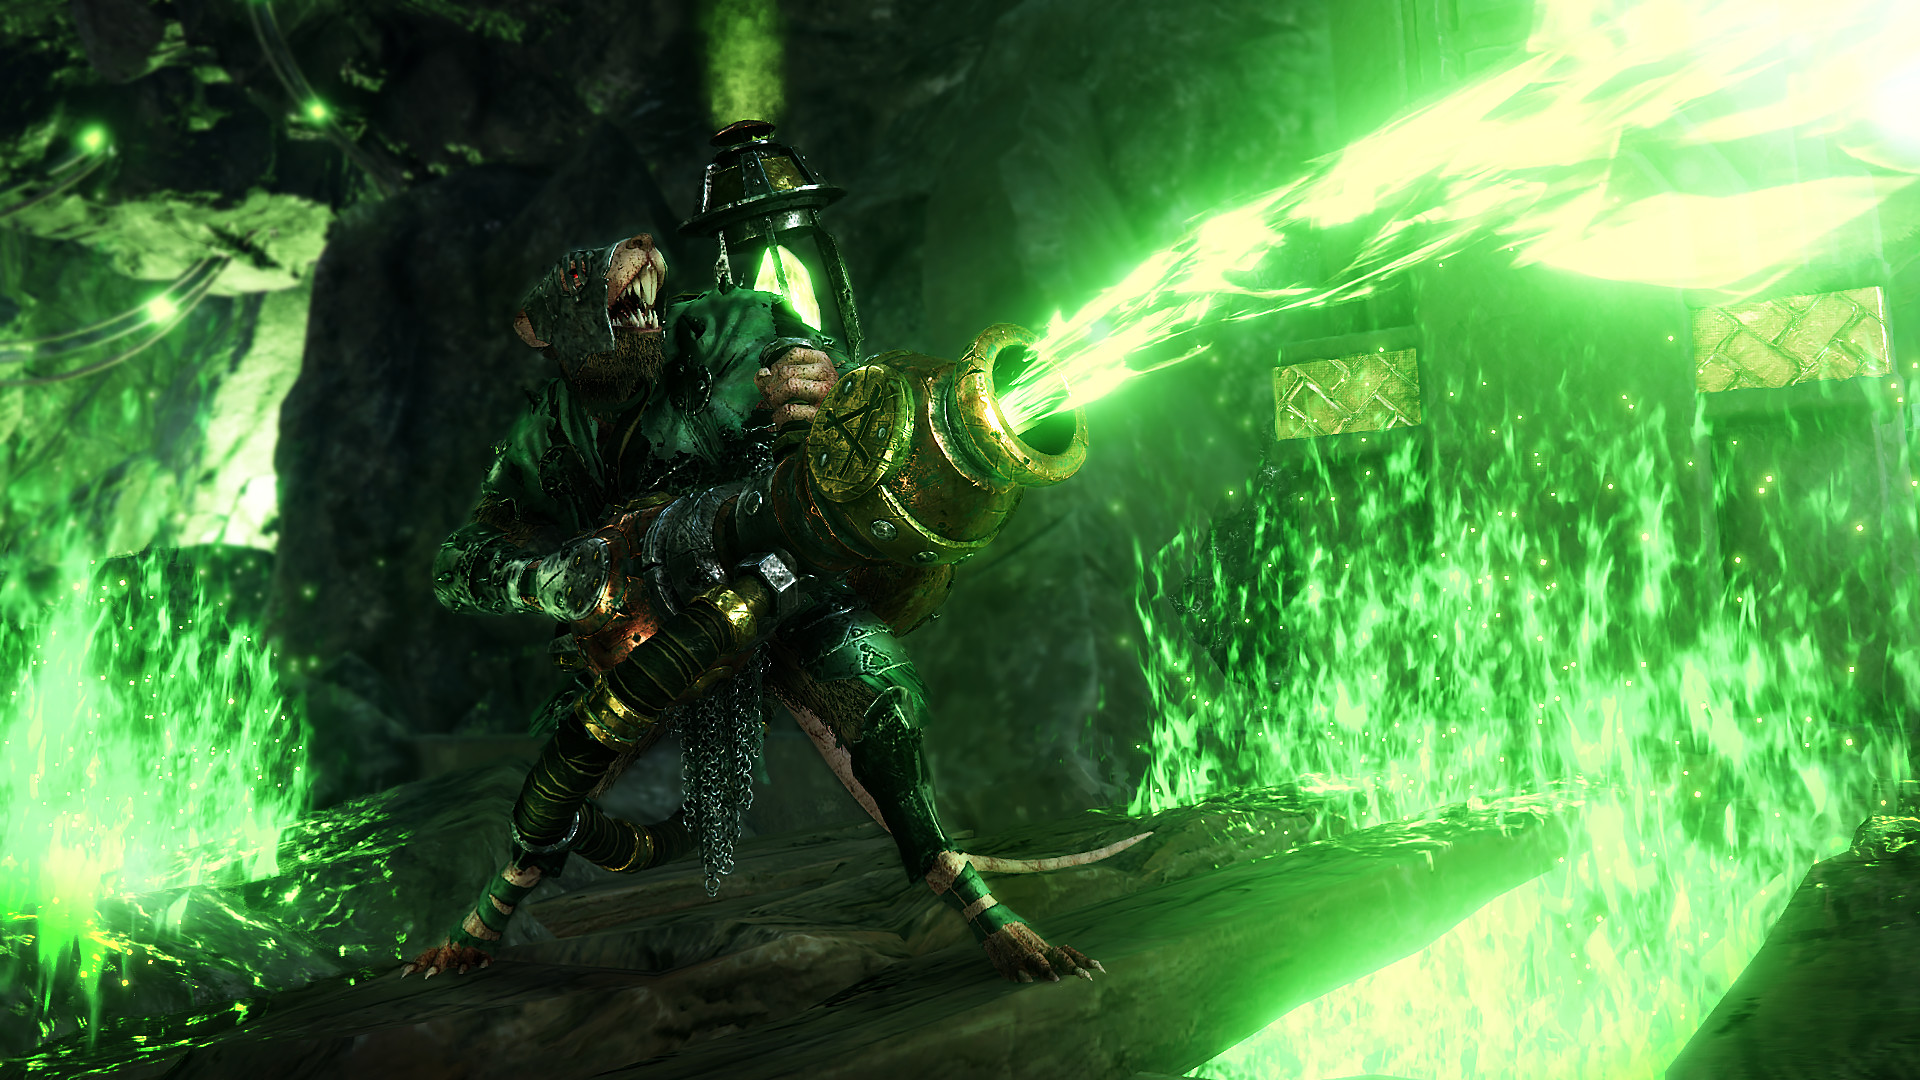 Warhammer: Vermintide 2 Tips and tricks for legend or champion difficulty